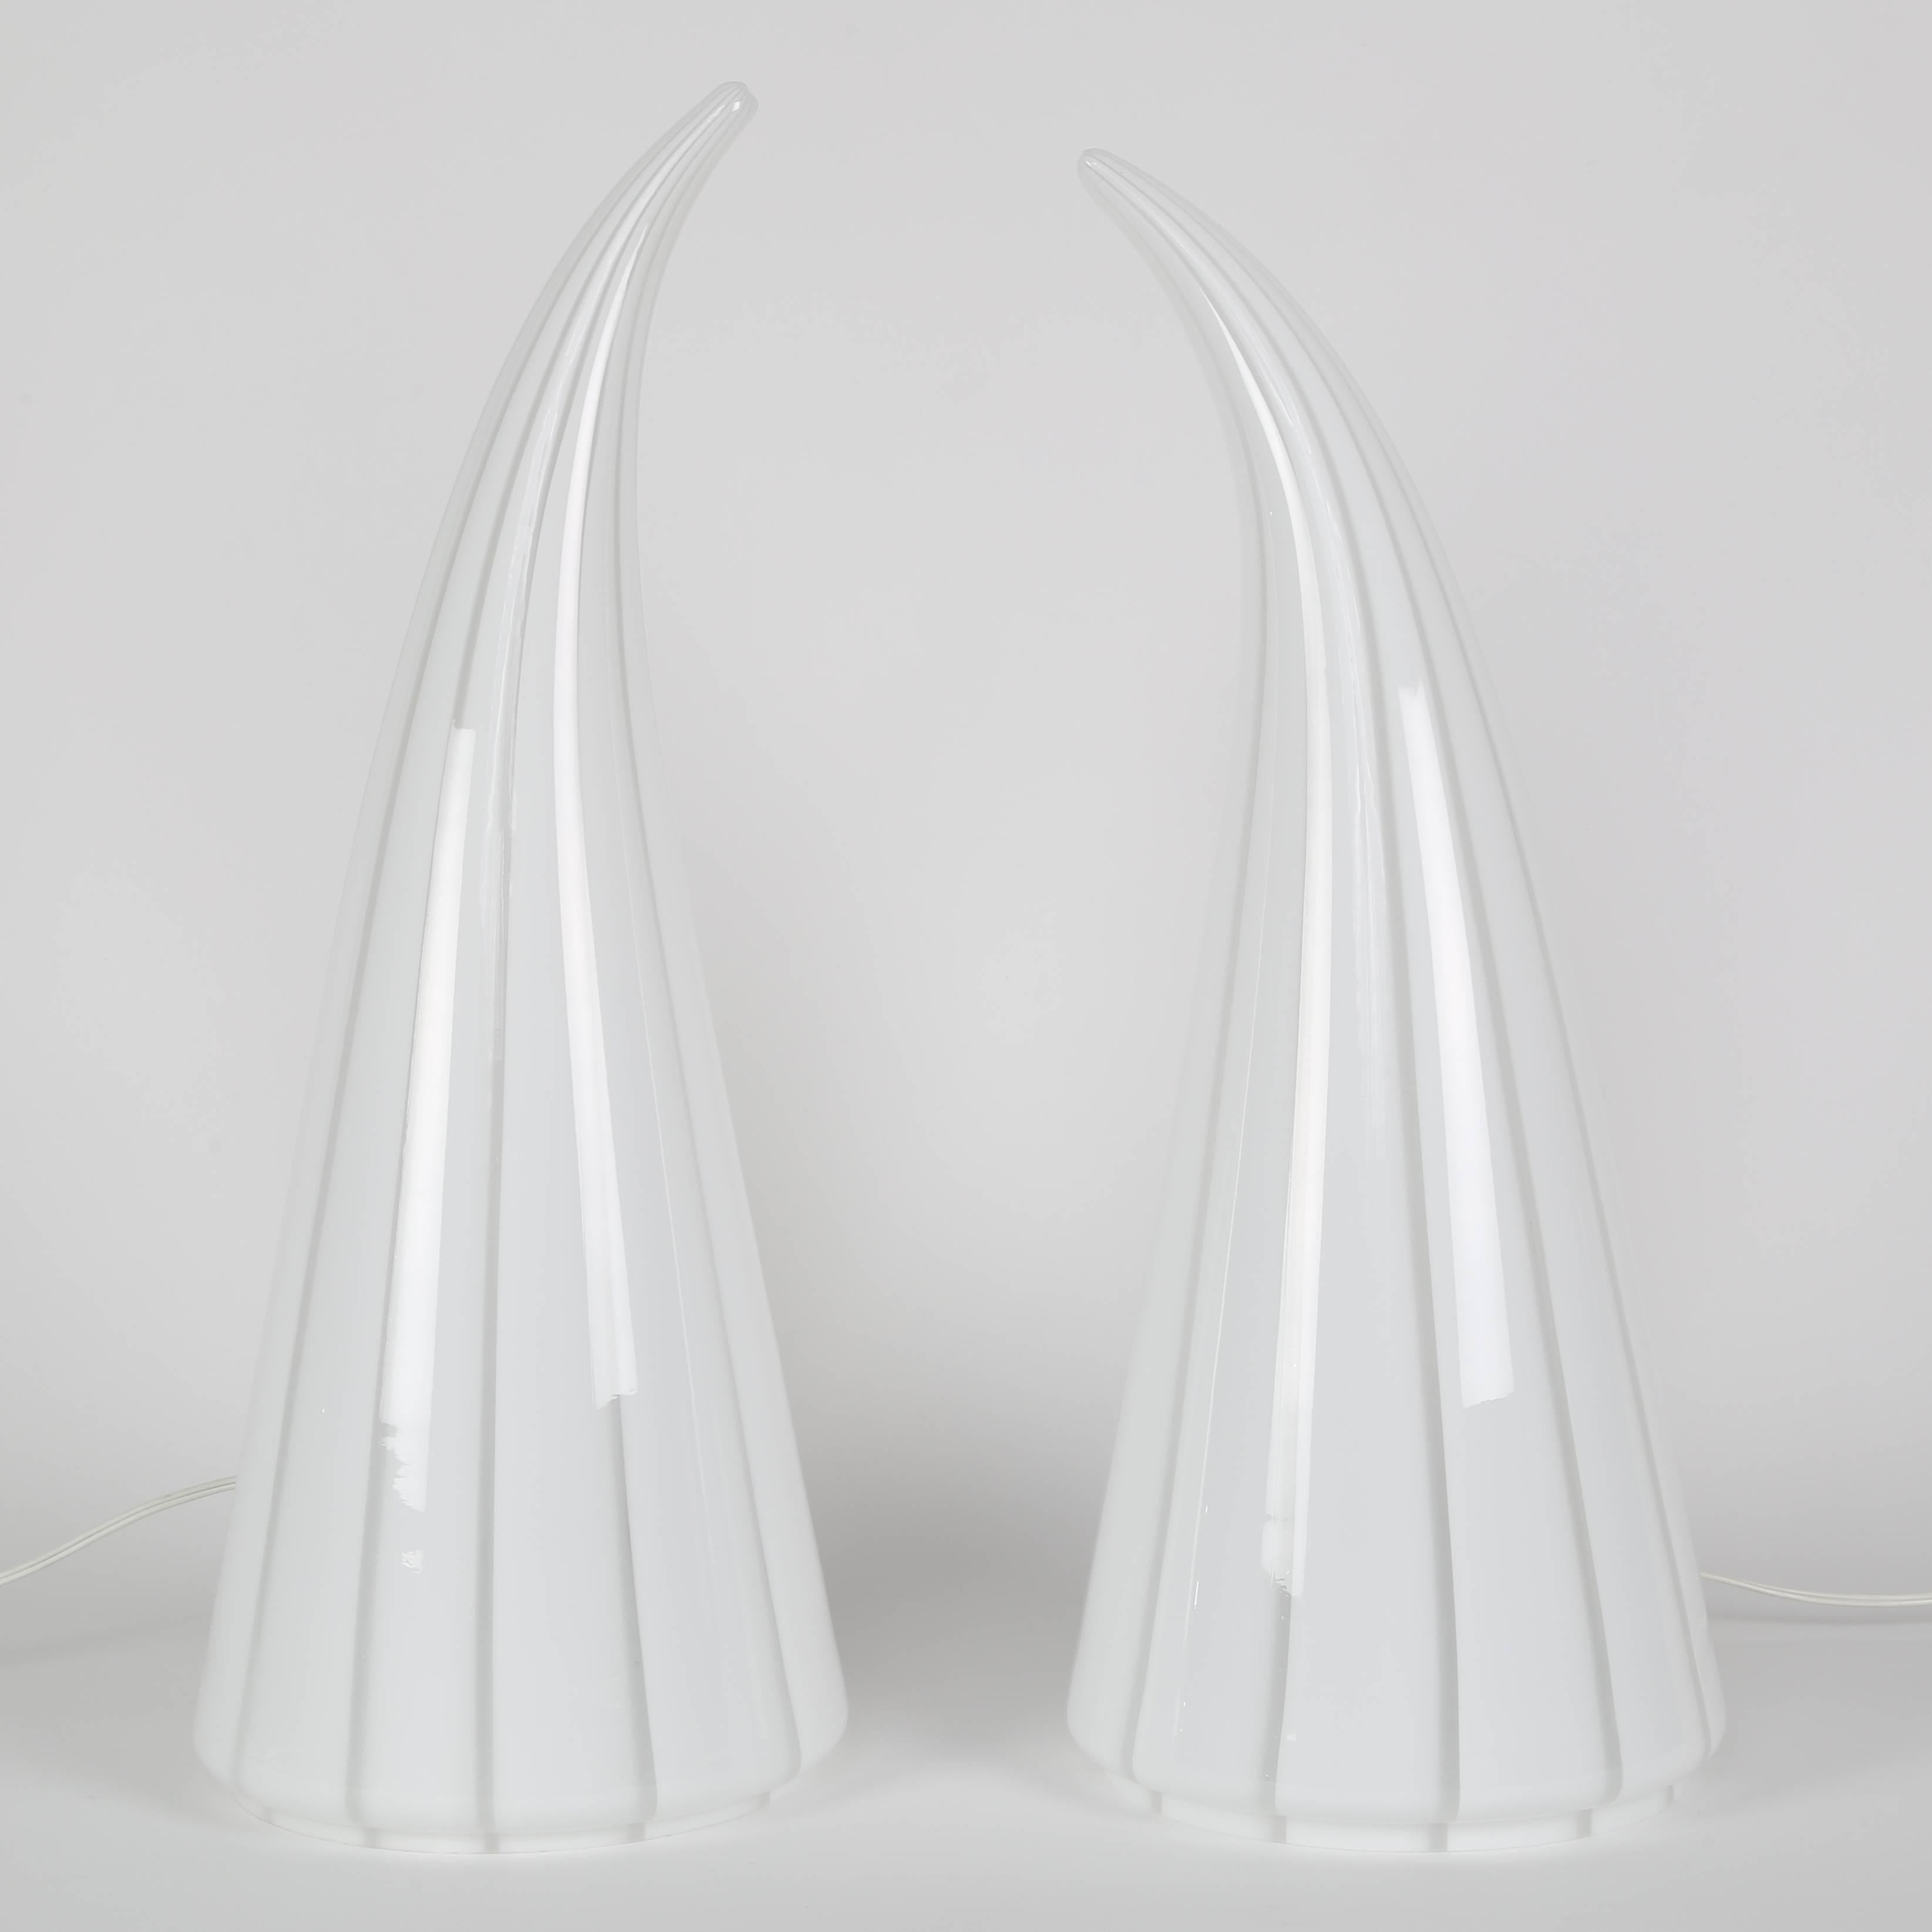 Pair of Vetri Murano Conical Table Lamps, Circa 1980s im Zustand „Gut“ im Angebot in Brooklyn, NY